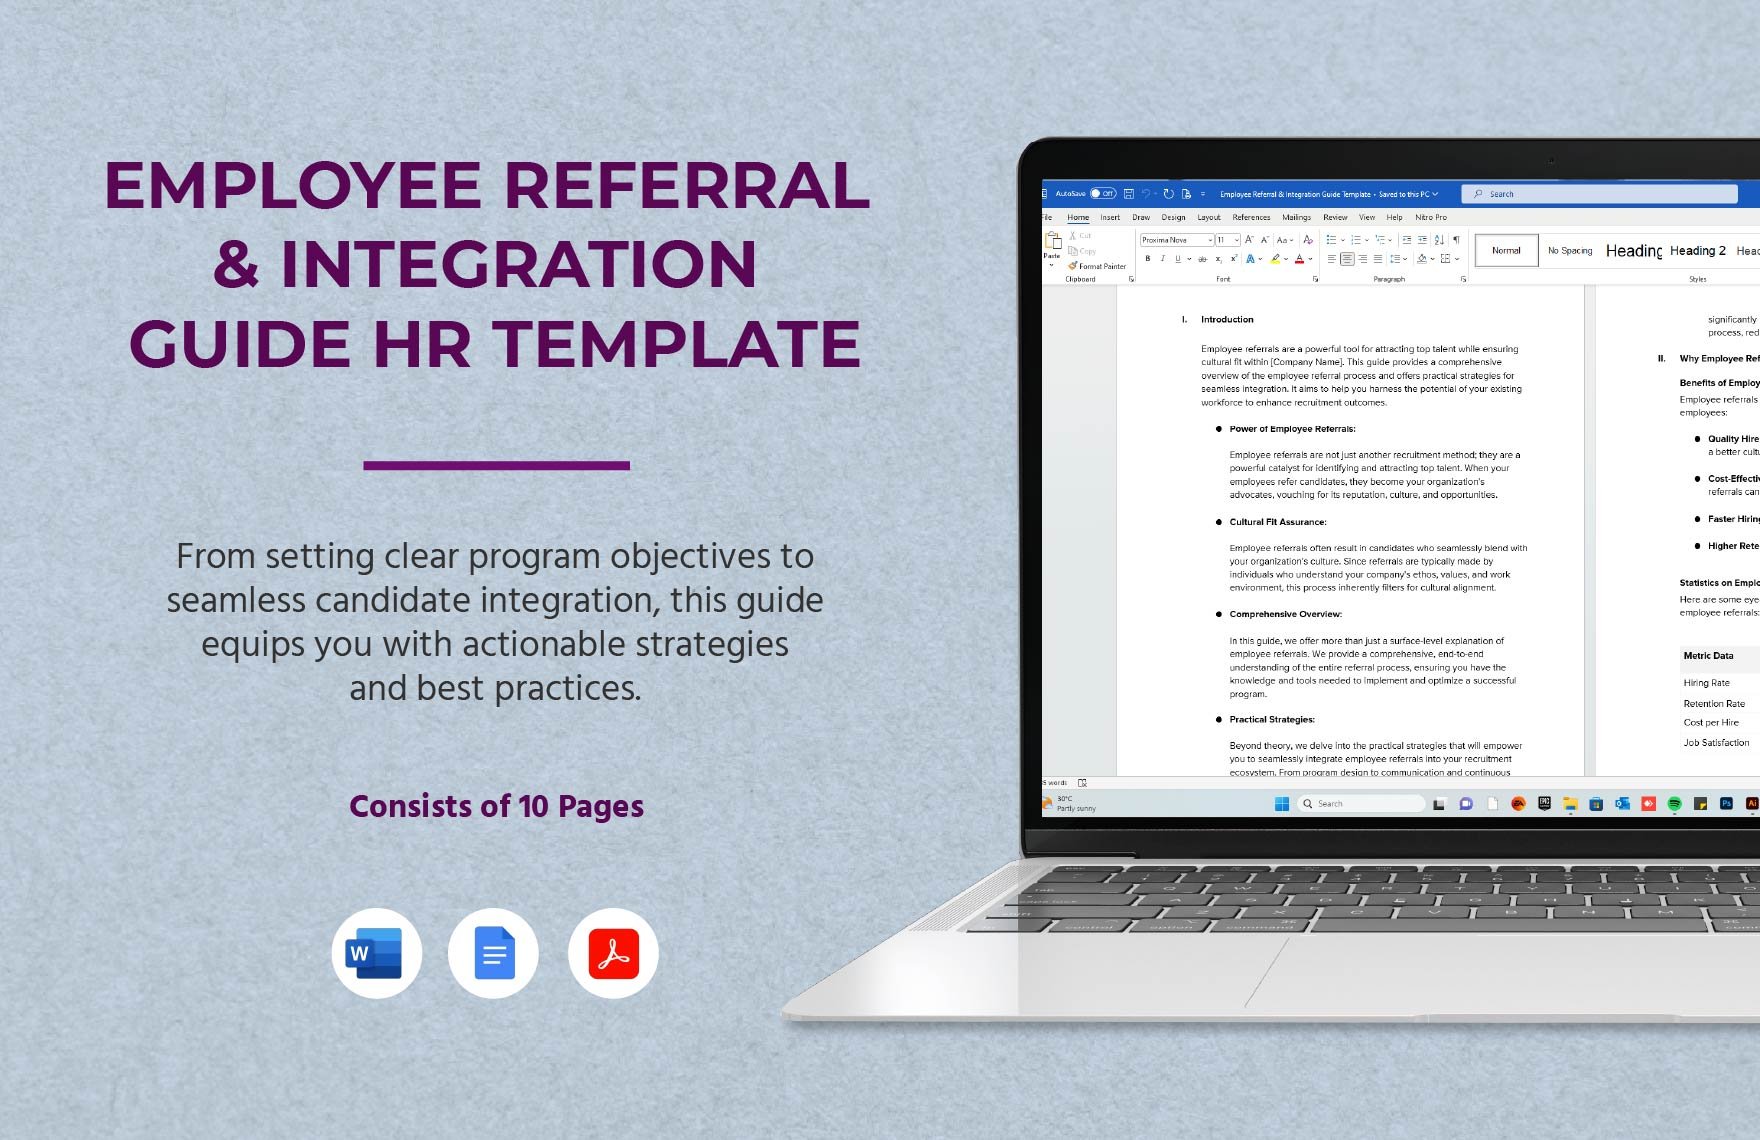 Employee Referral & Integration Guide HR Template in Word, Google Docs, PDF